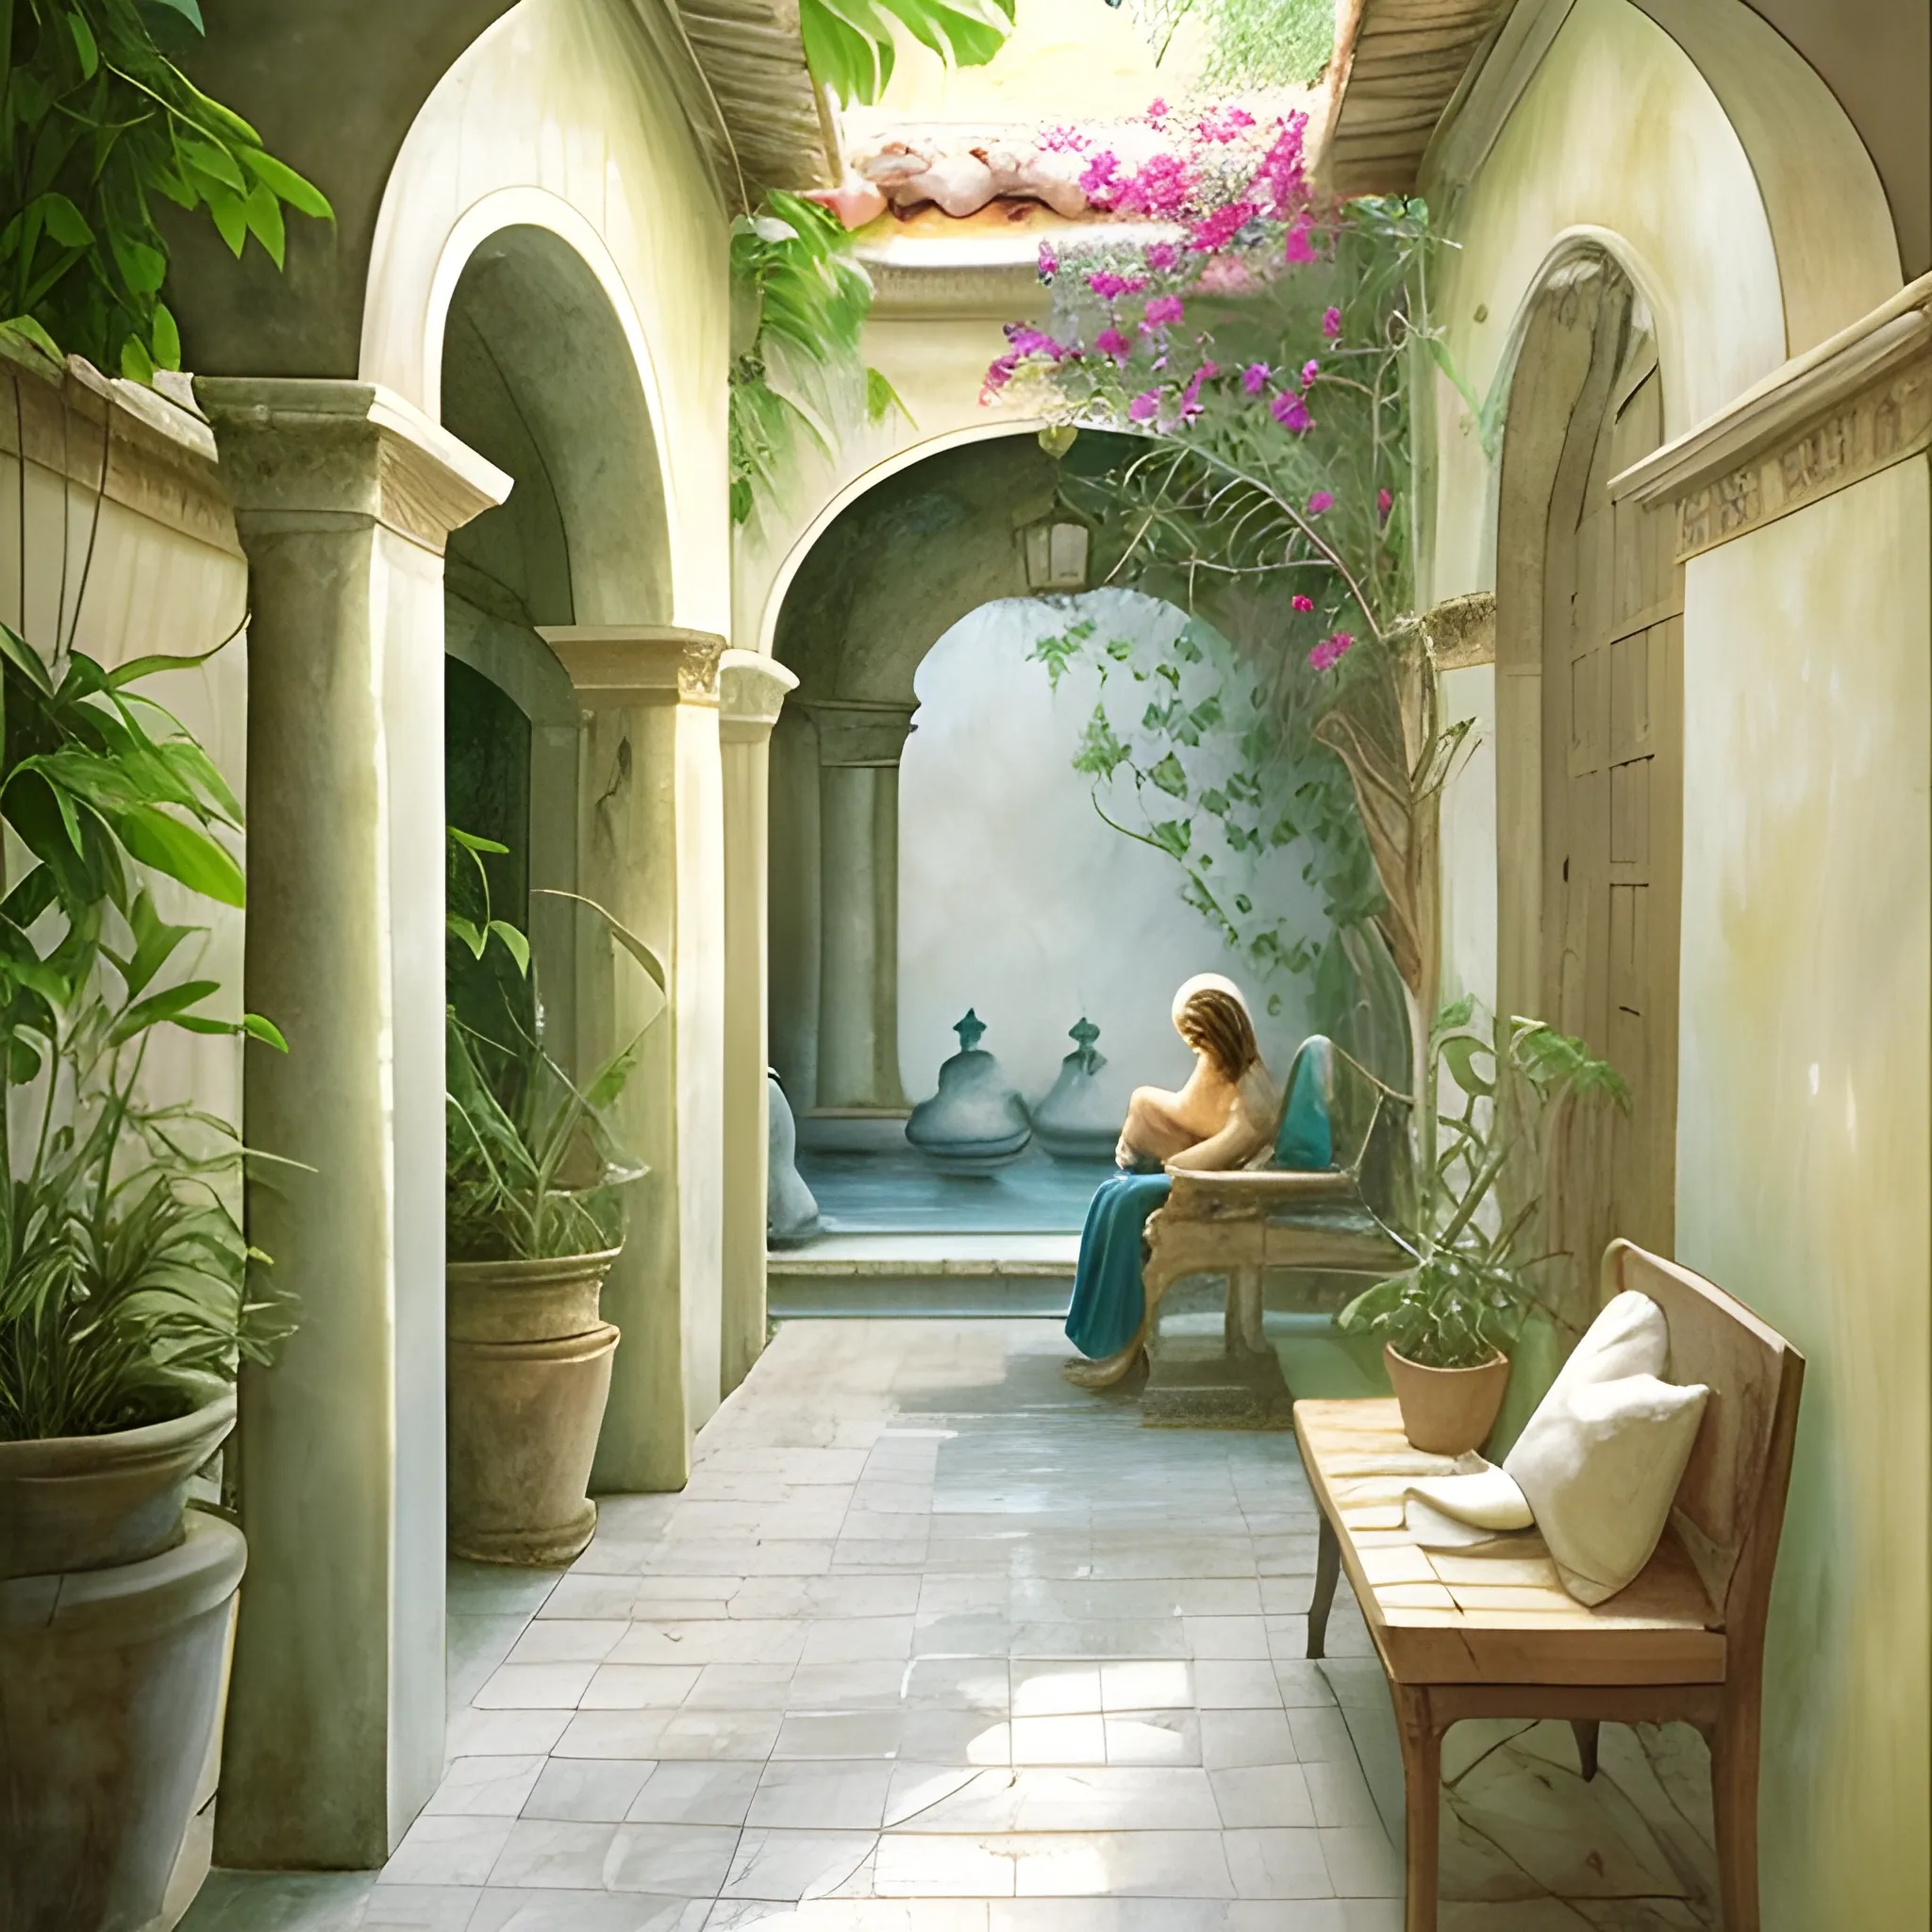 From a courtyard with a woman sitting on a bench in the shade I look at those scattered lights, and a circle of water in the cistern, and smell of jasmine and honeysuckle, I hear the silence of the sleeping bird, and I feel the humidity of the hallway, Water Color